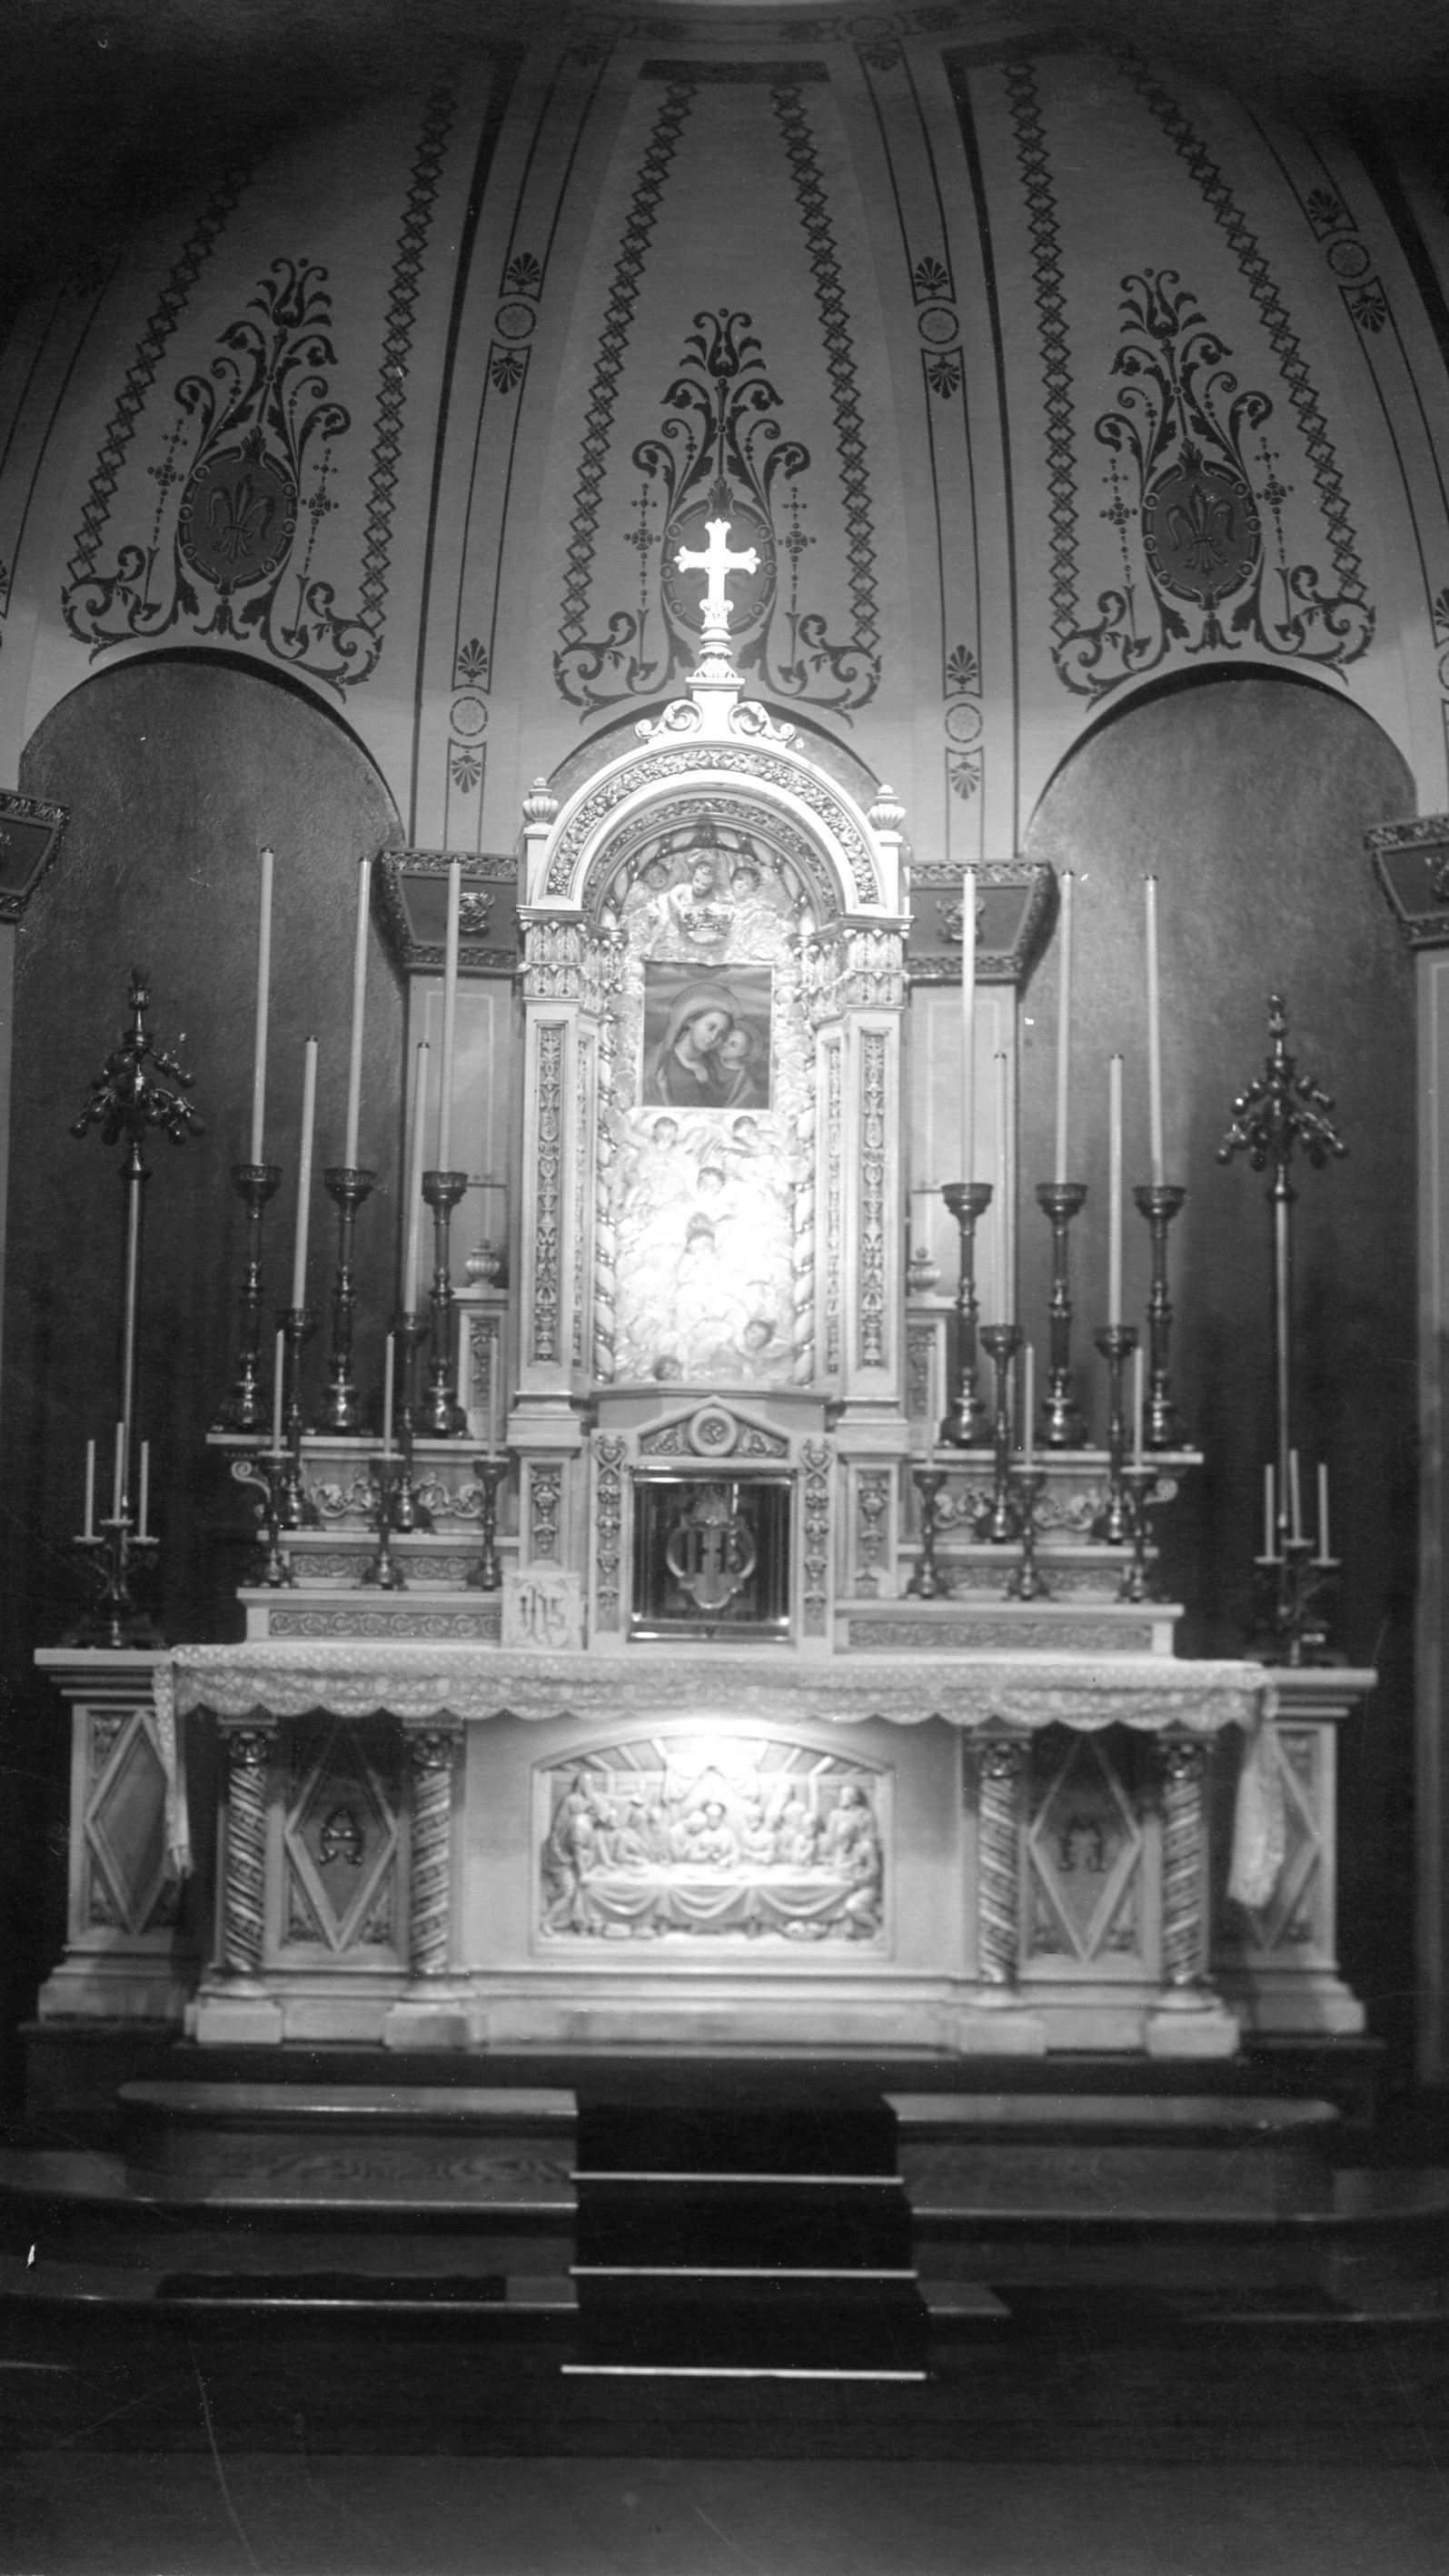 Altar at Our Lady of Good Counsel in South Philadelphia